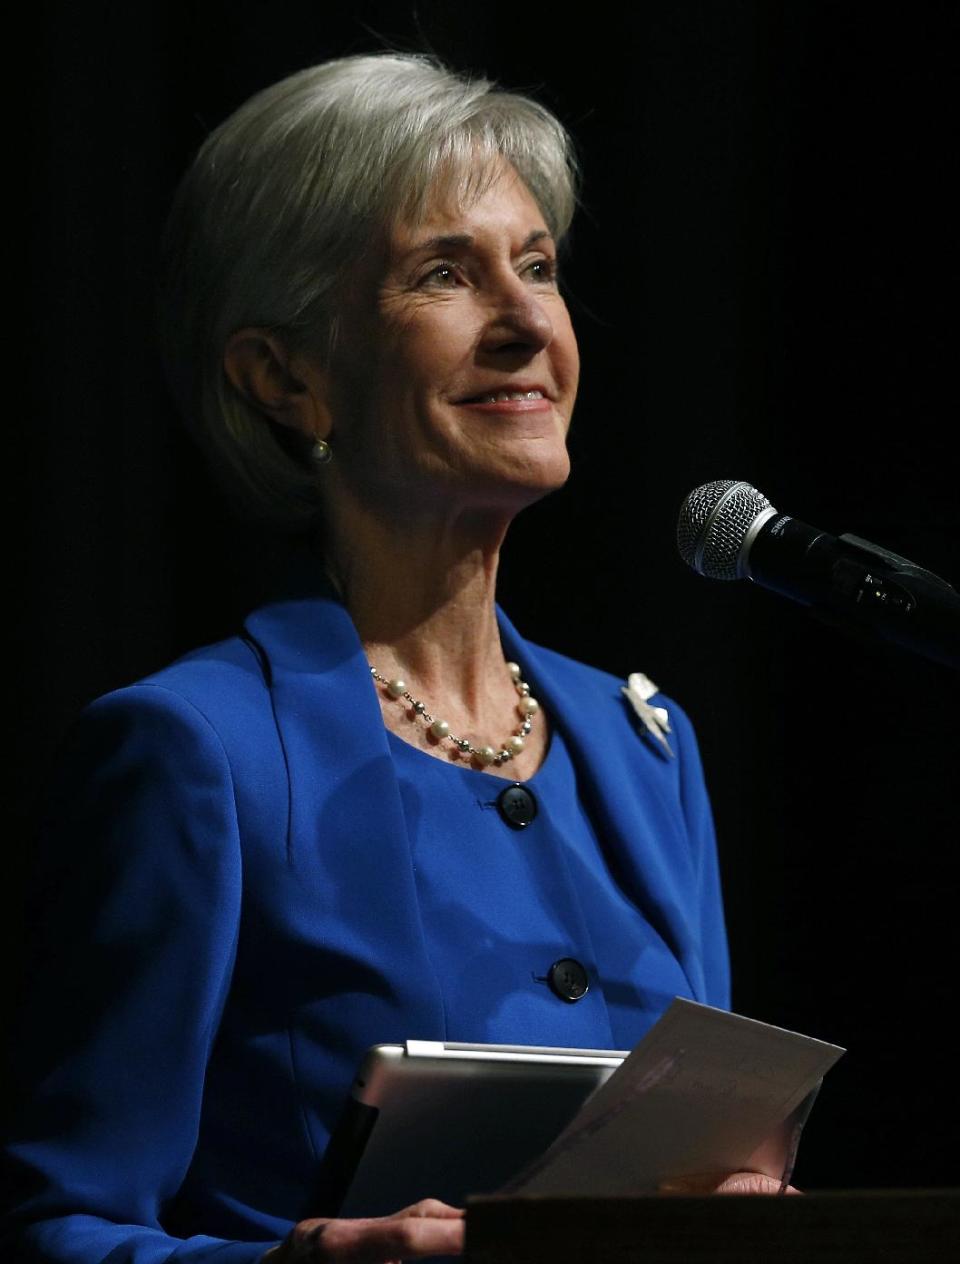 Health and Human Services Secretary Kathleen Sebelius delivers the keynote speech at the opening of the University of Colorado's annual Conference on World Affairs, in Boulder, Colo., on Monday, April 7, 2014. (AP Photo/Brennan Linsley)